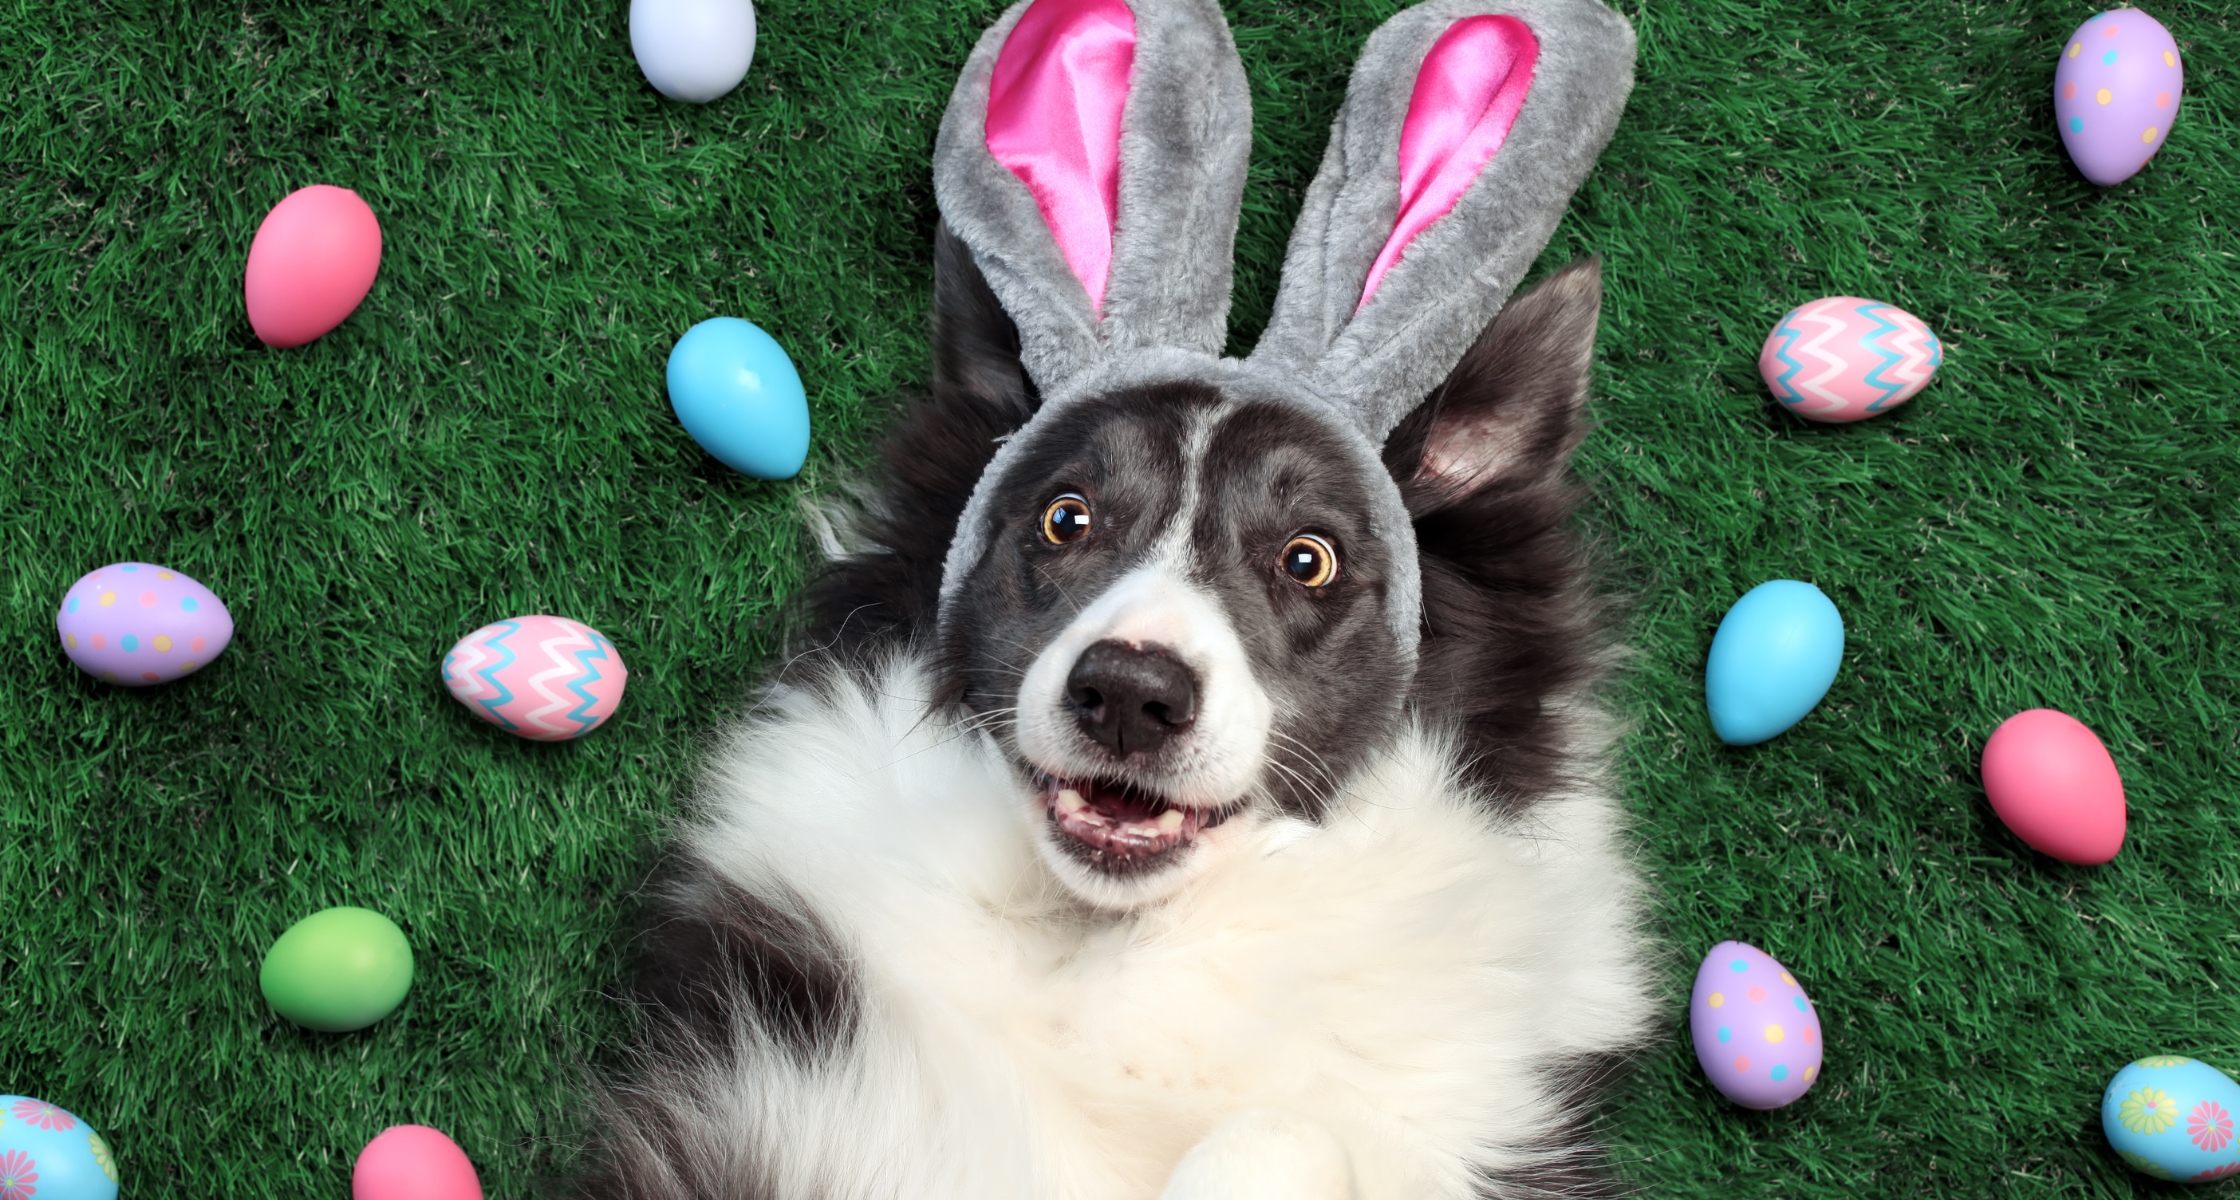 A “Hoppy” Holiday: Easter Pet Safety Tips